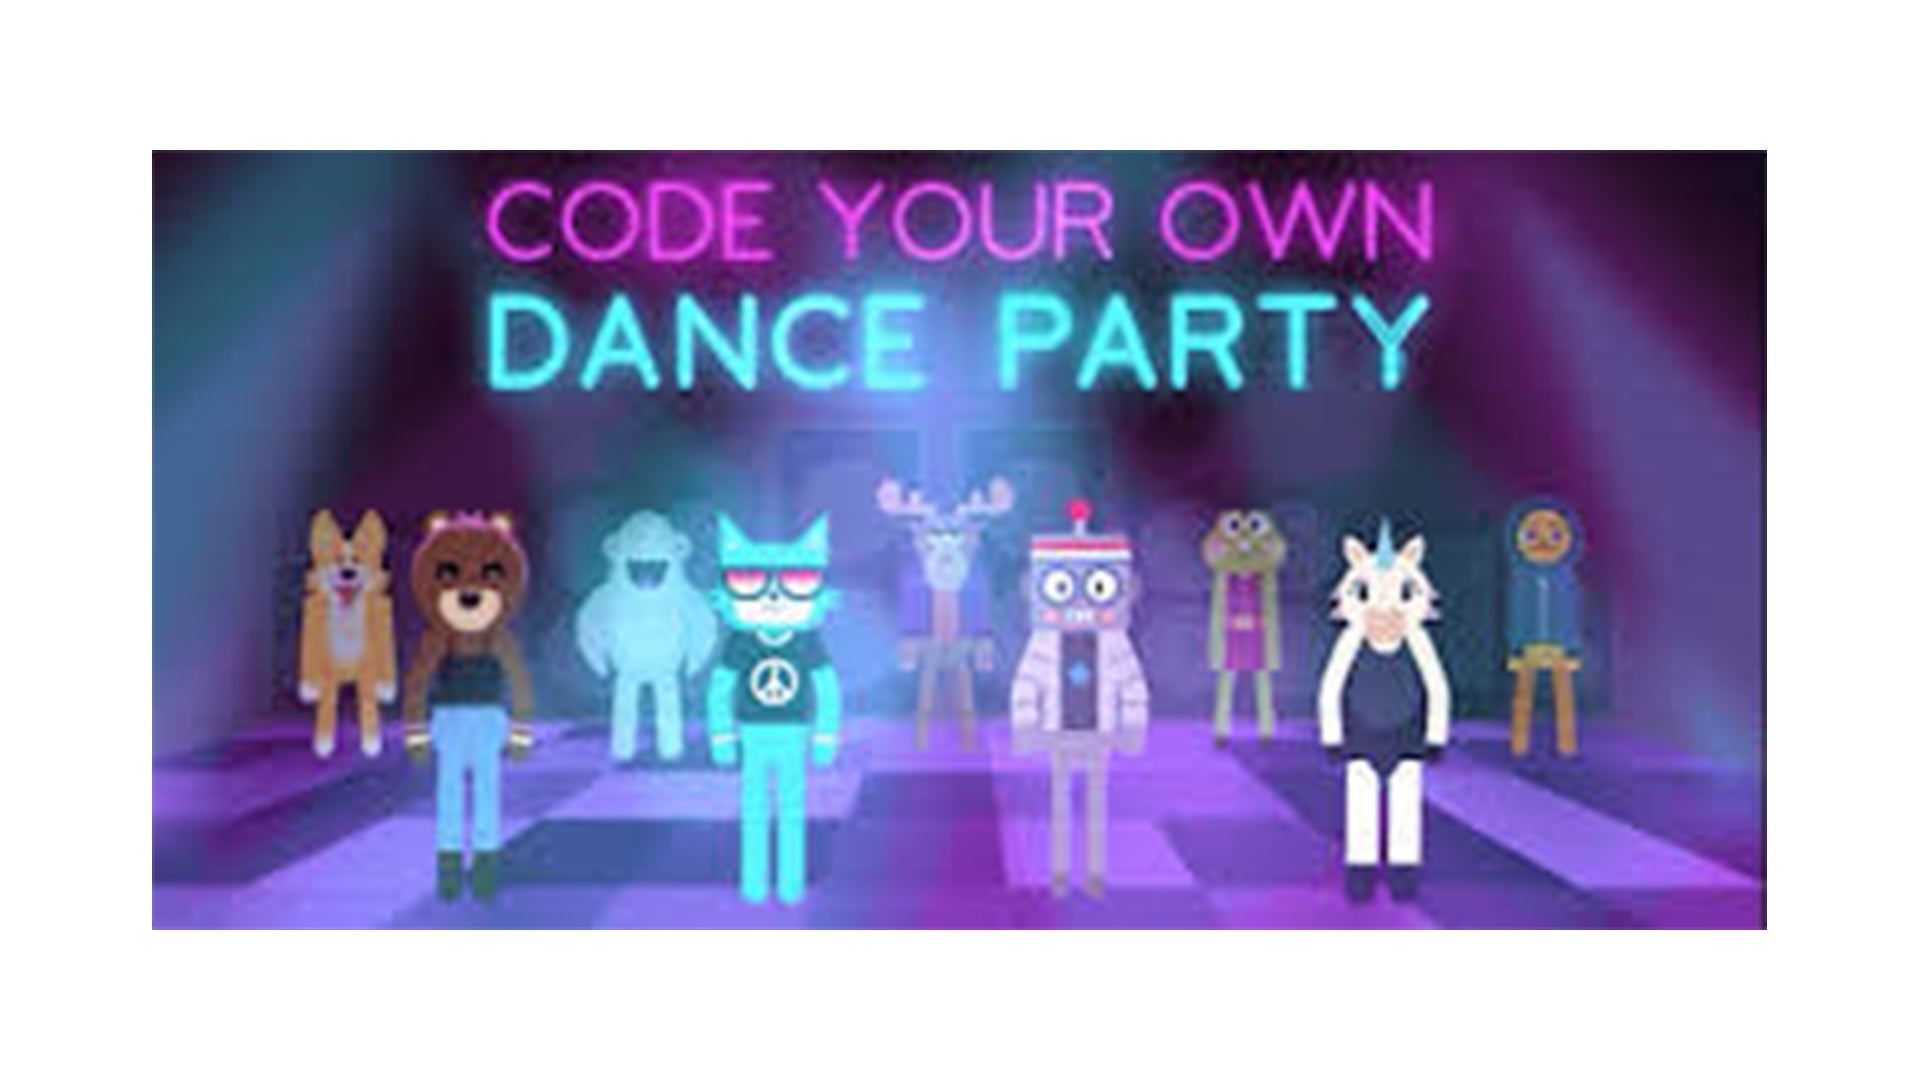 Code.org announces their featured Hour of Code activity: Dance Party